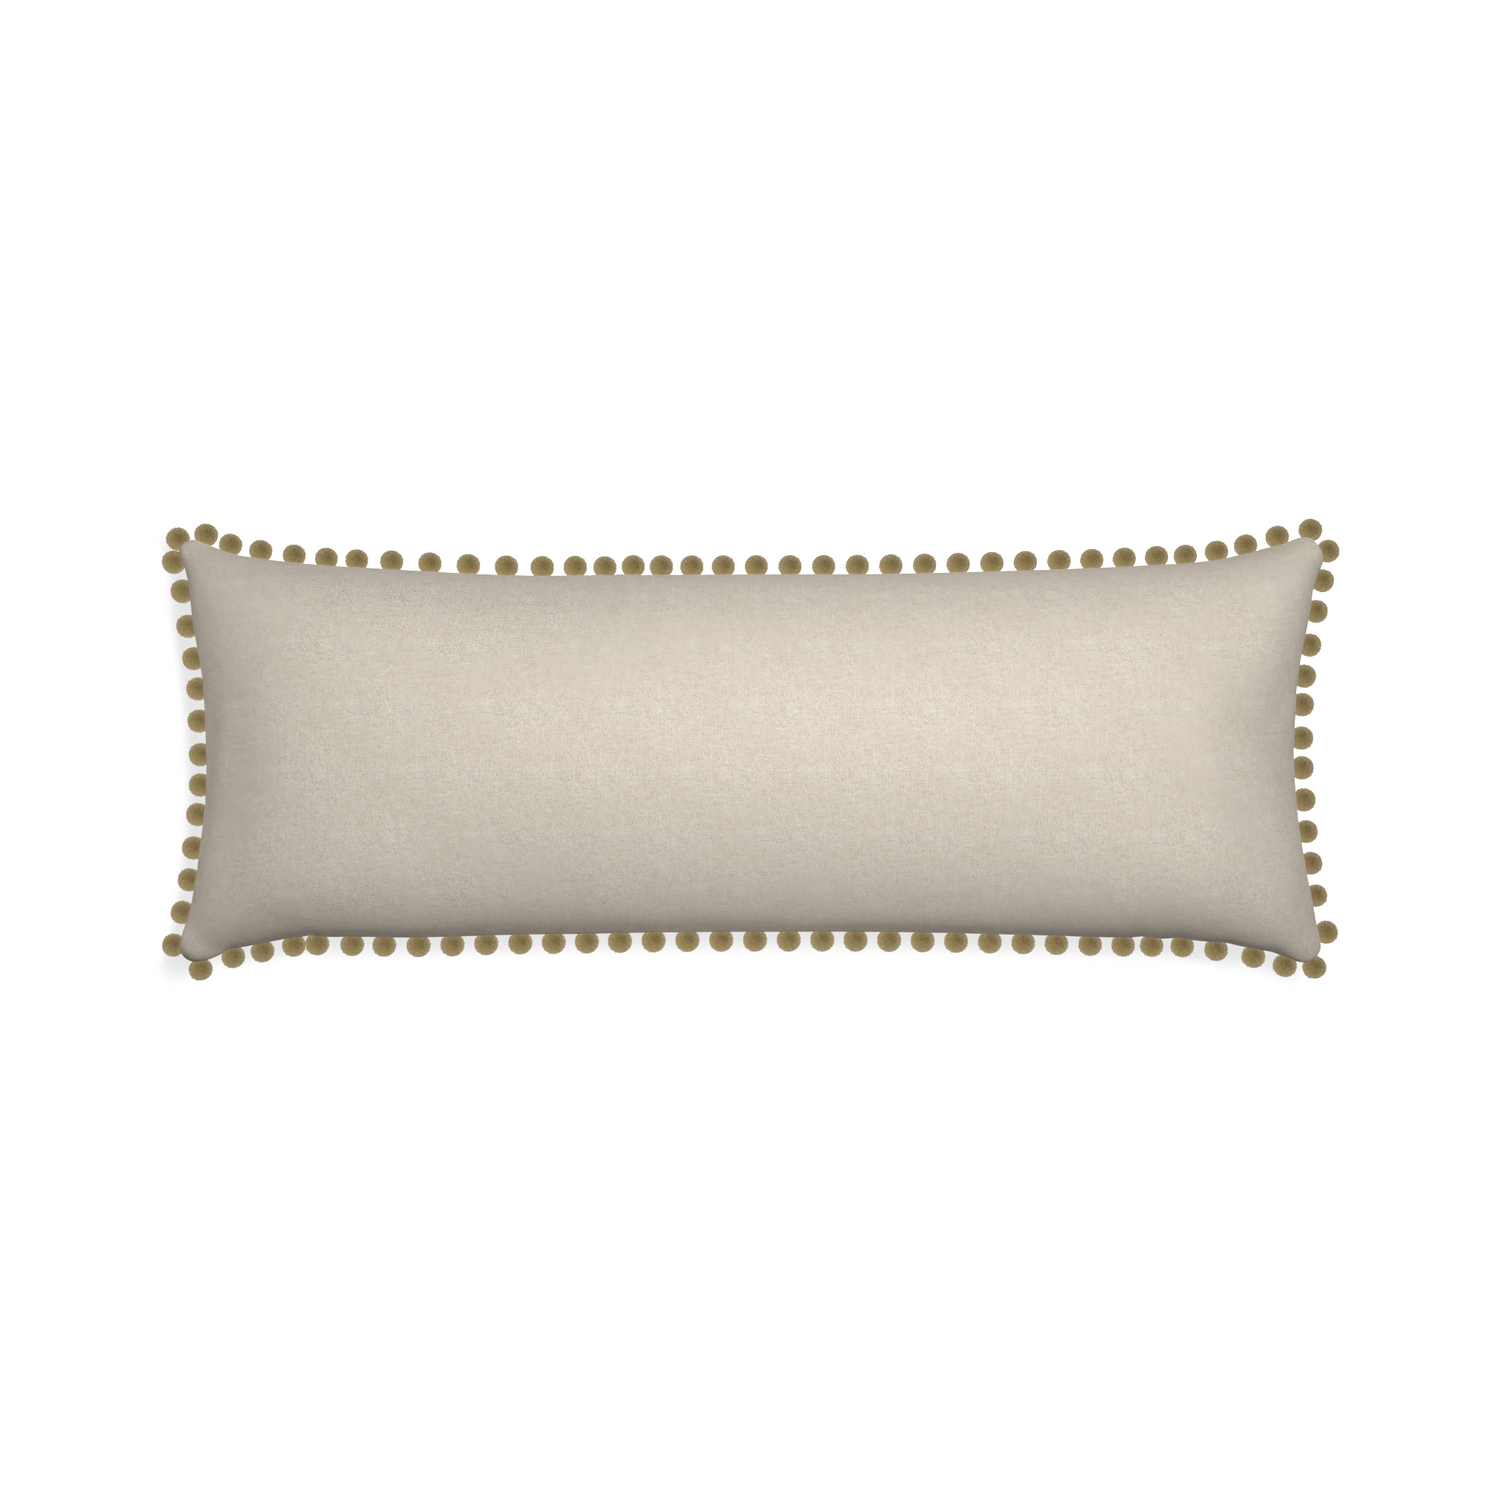 Xl-lumbar oat custom light brownpillow with olive pom pom on white background